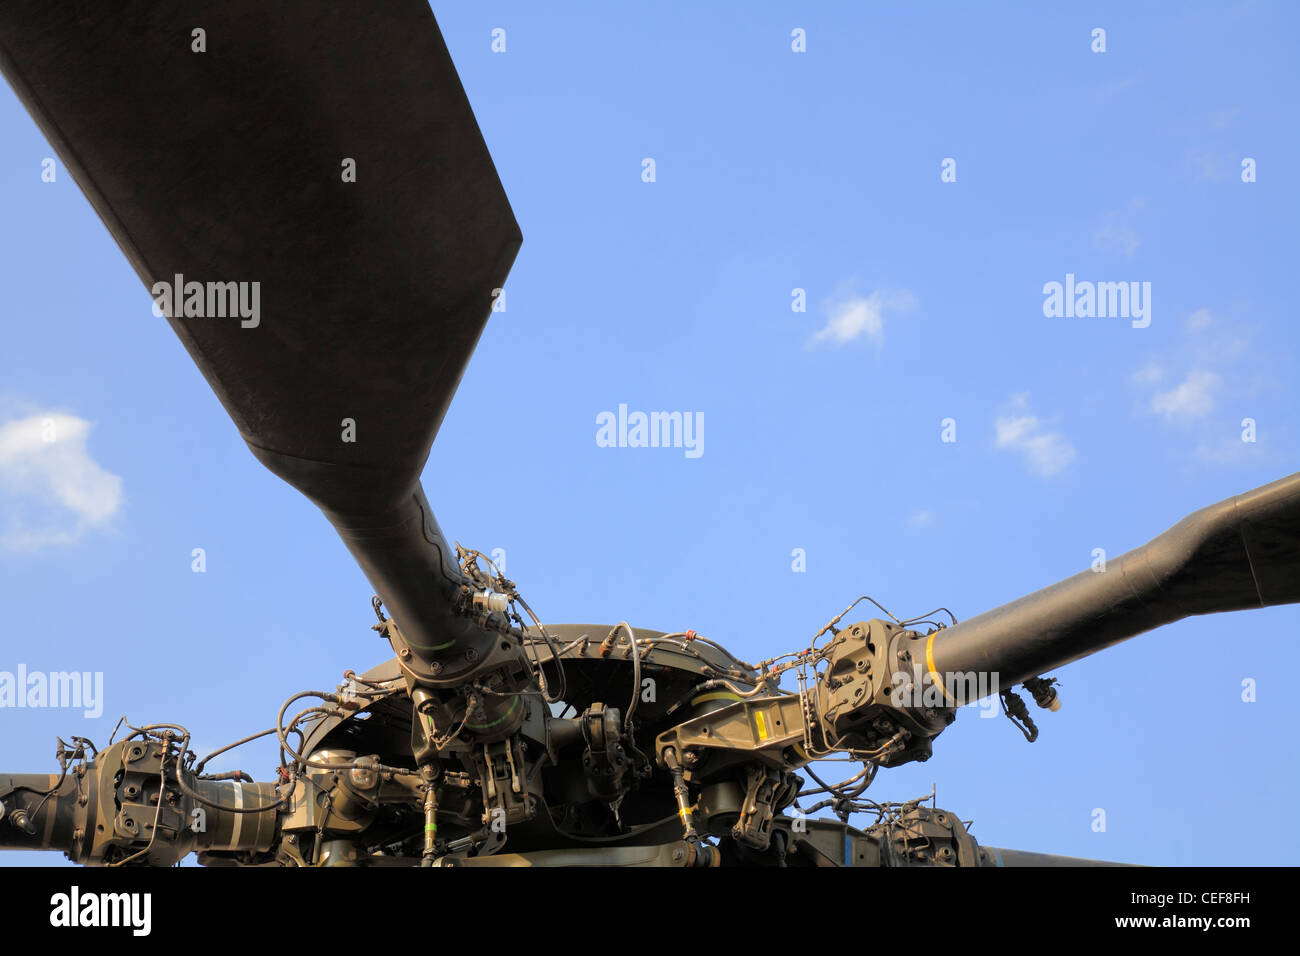 Main rotor blades and rotor head against blue sky, military helicopter Stock Photo